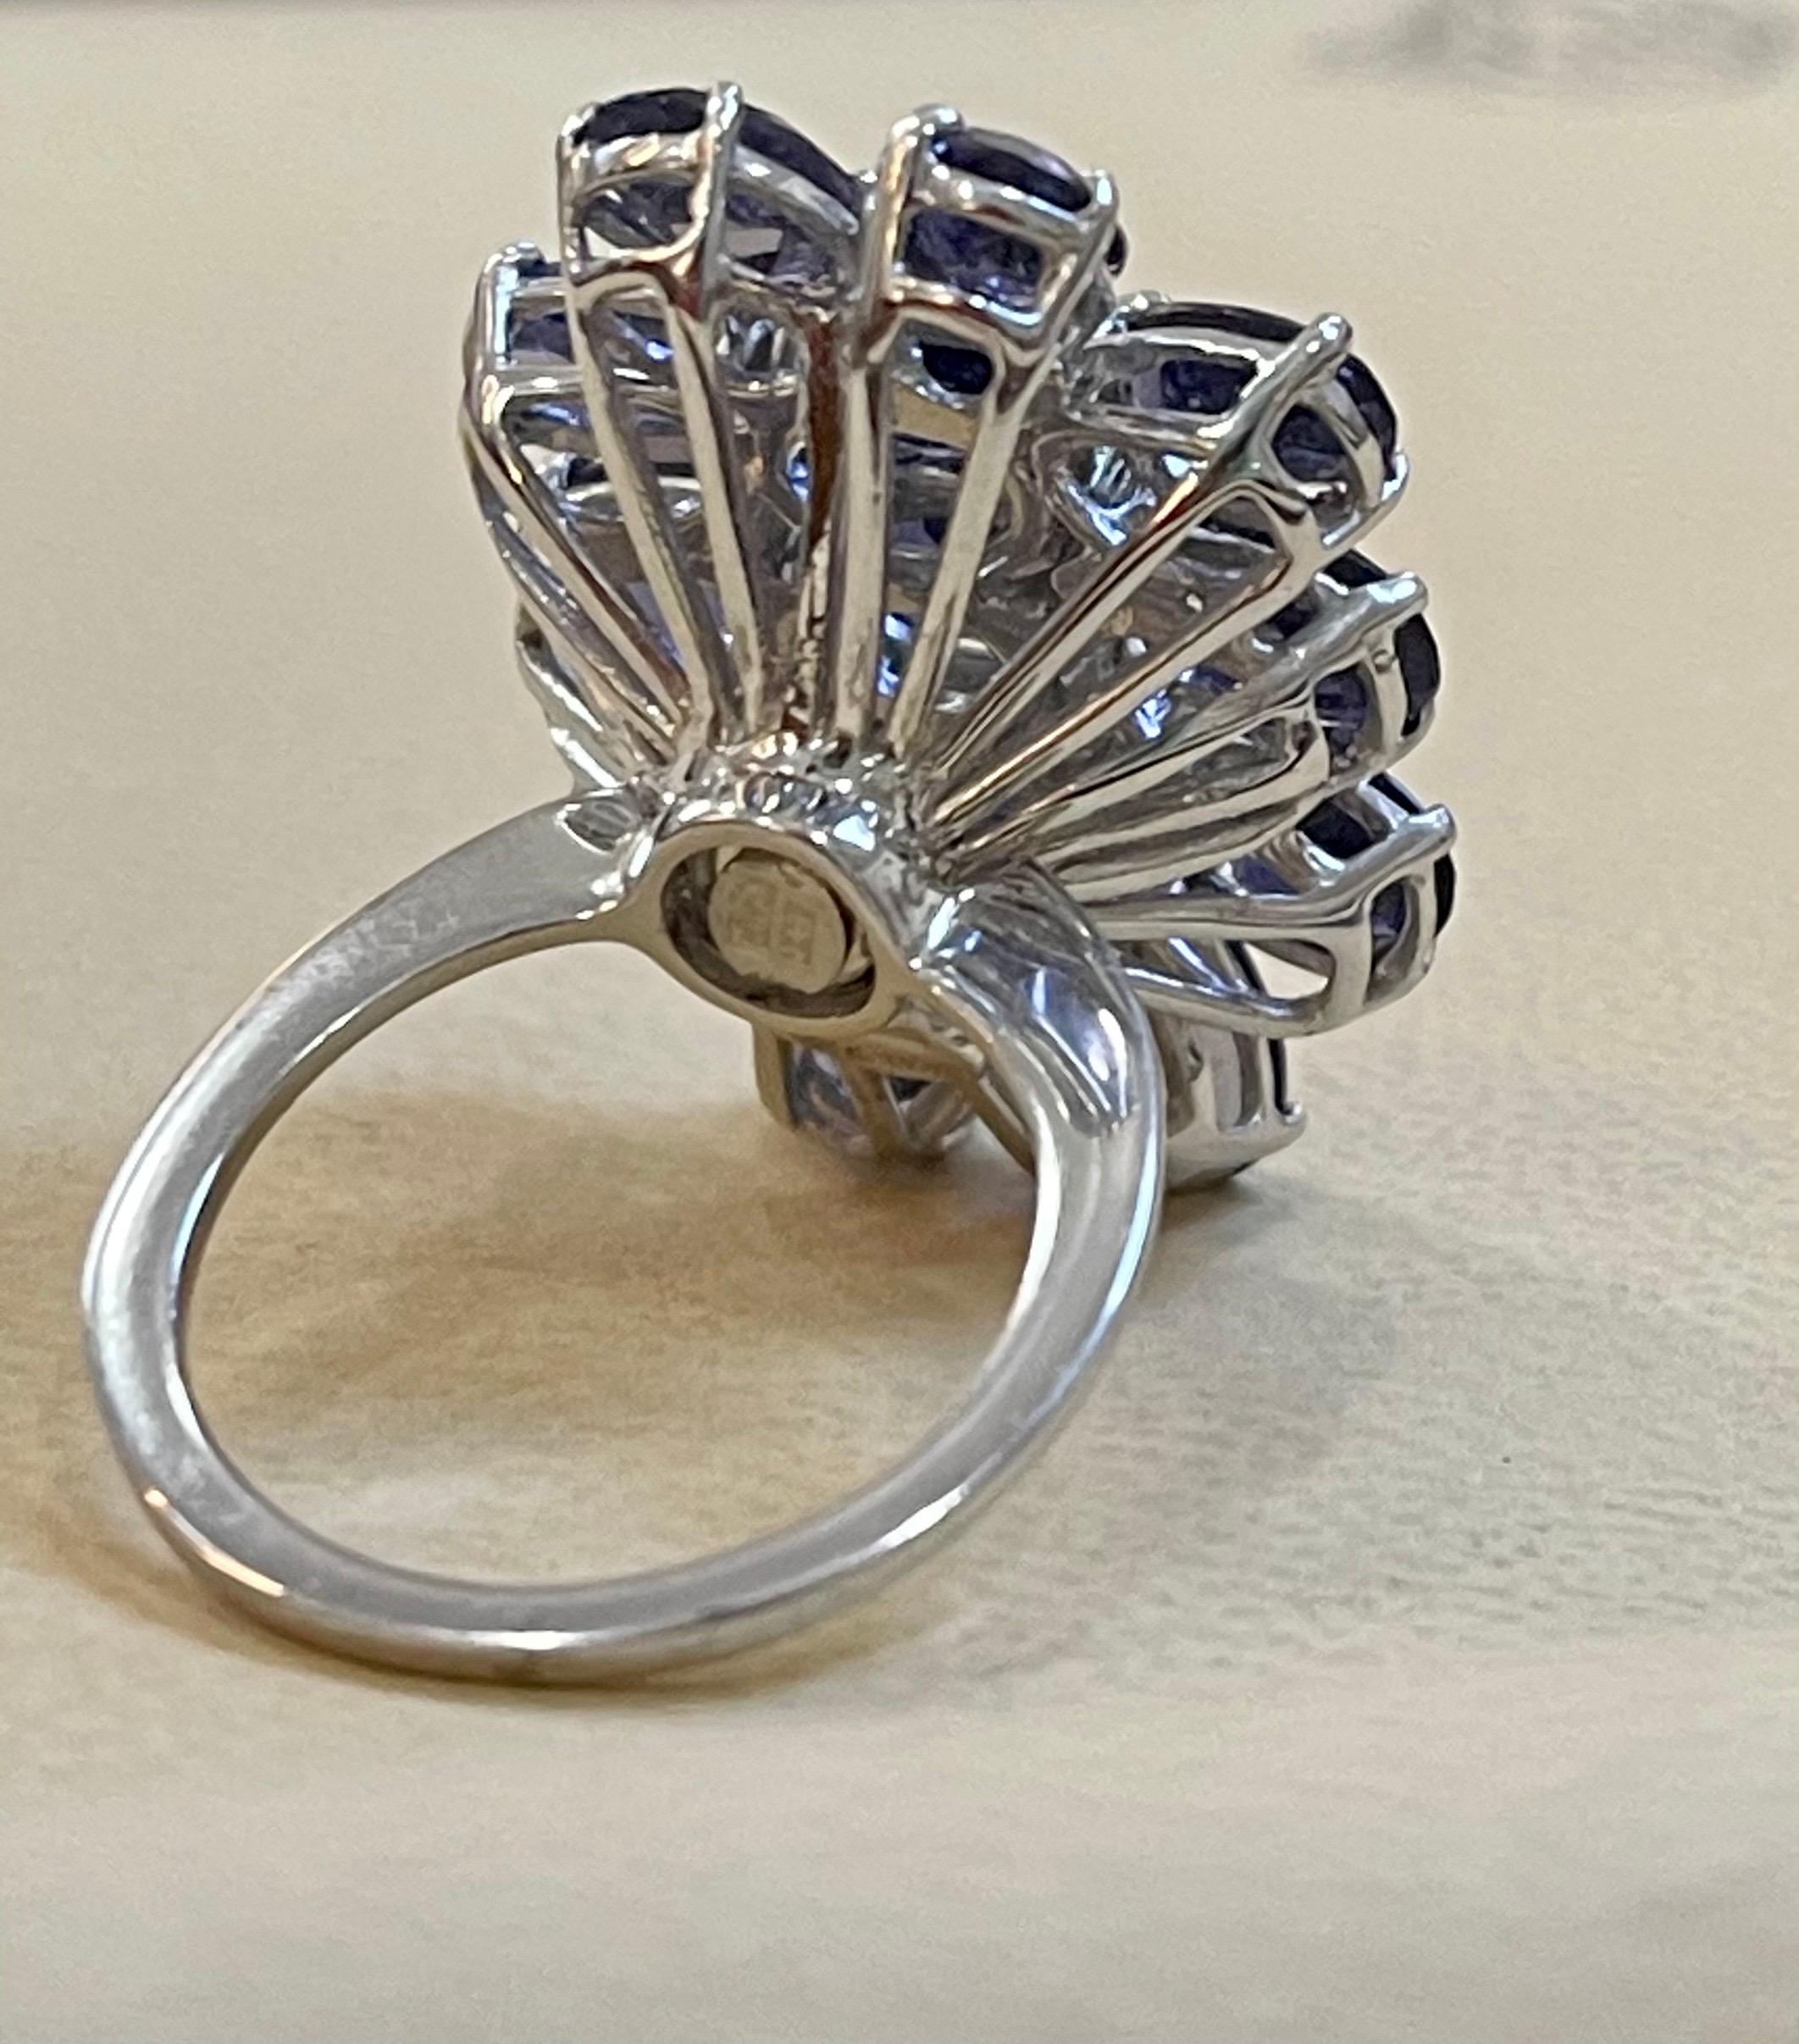 10 Carat Natural Iolite and Diamond Cocktail Ring in 18 Karat White Gold Estate In Excellent Condition For Sale In New York, NY